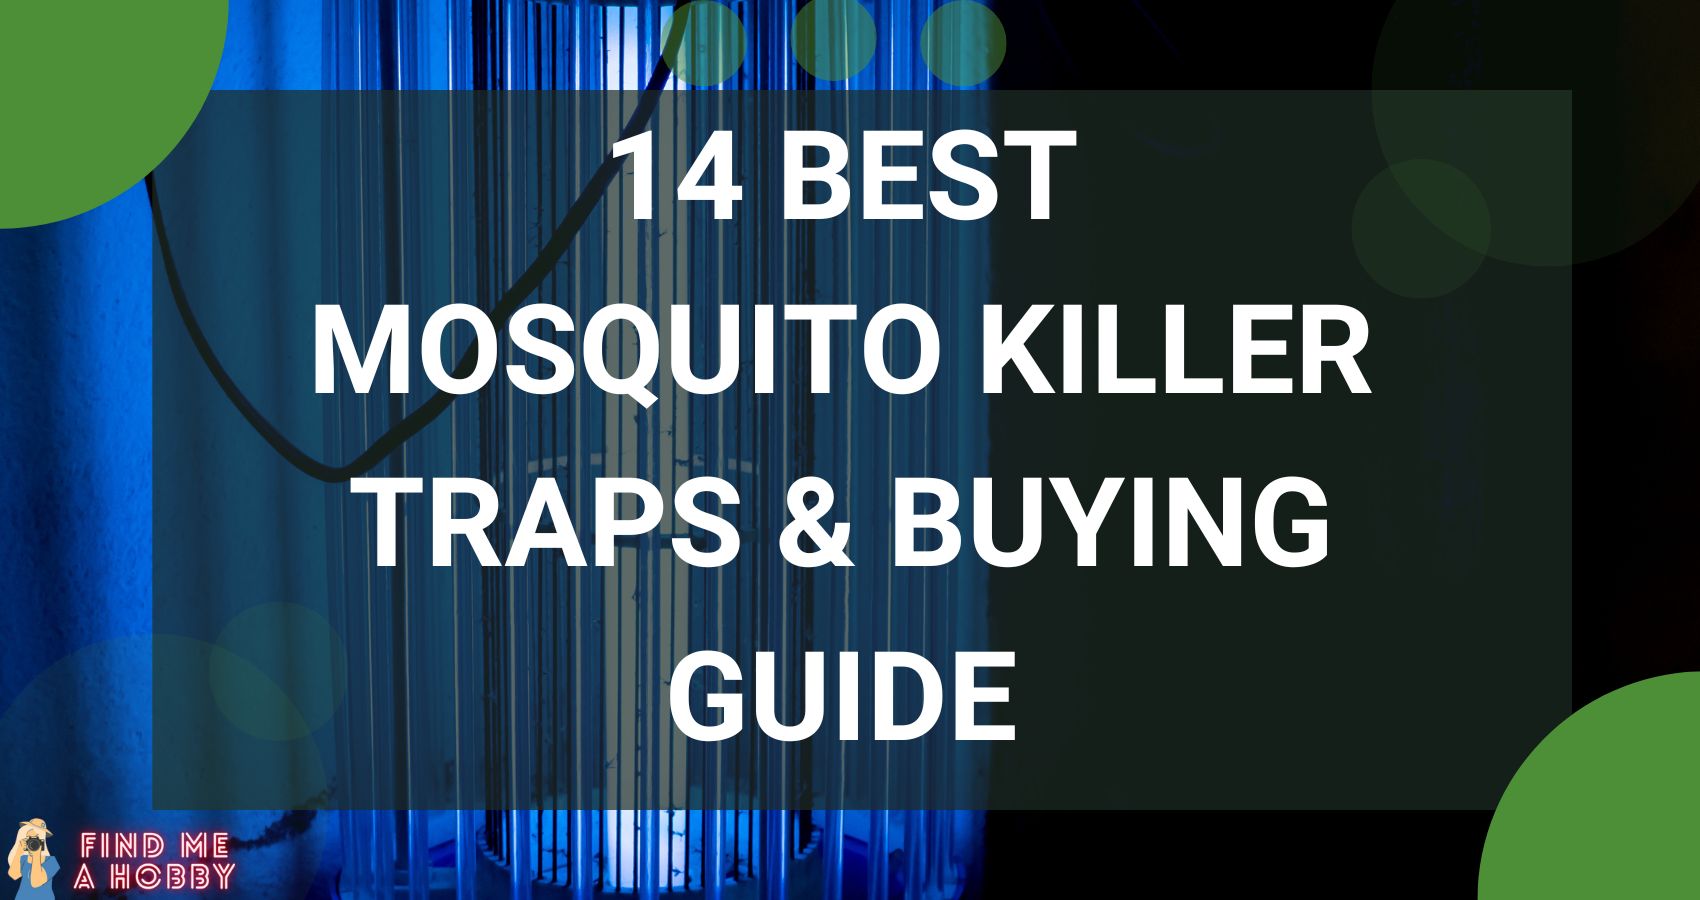 14 Best Mosquito Killer Traps & Buying Guide